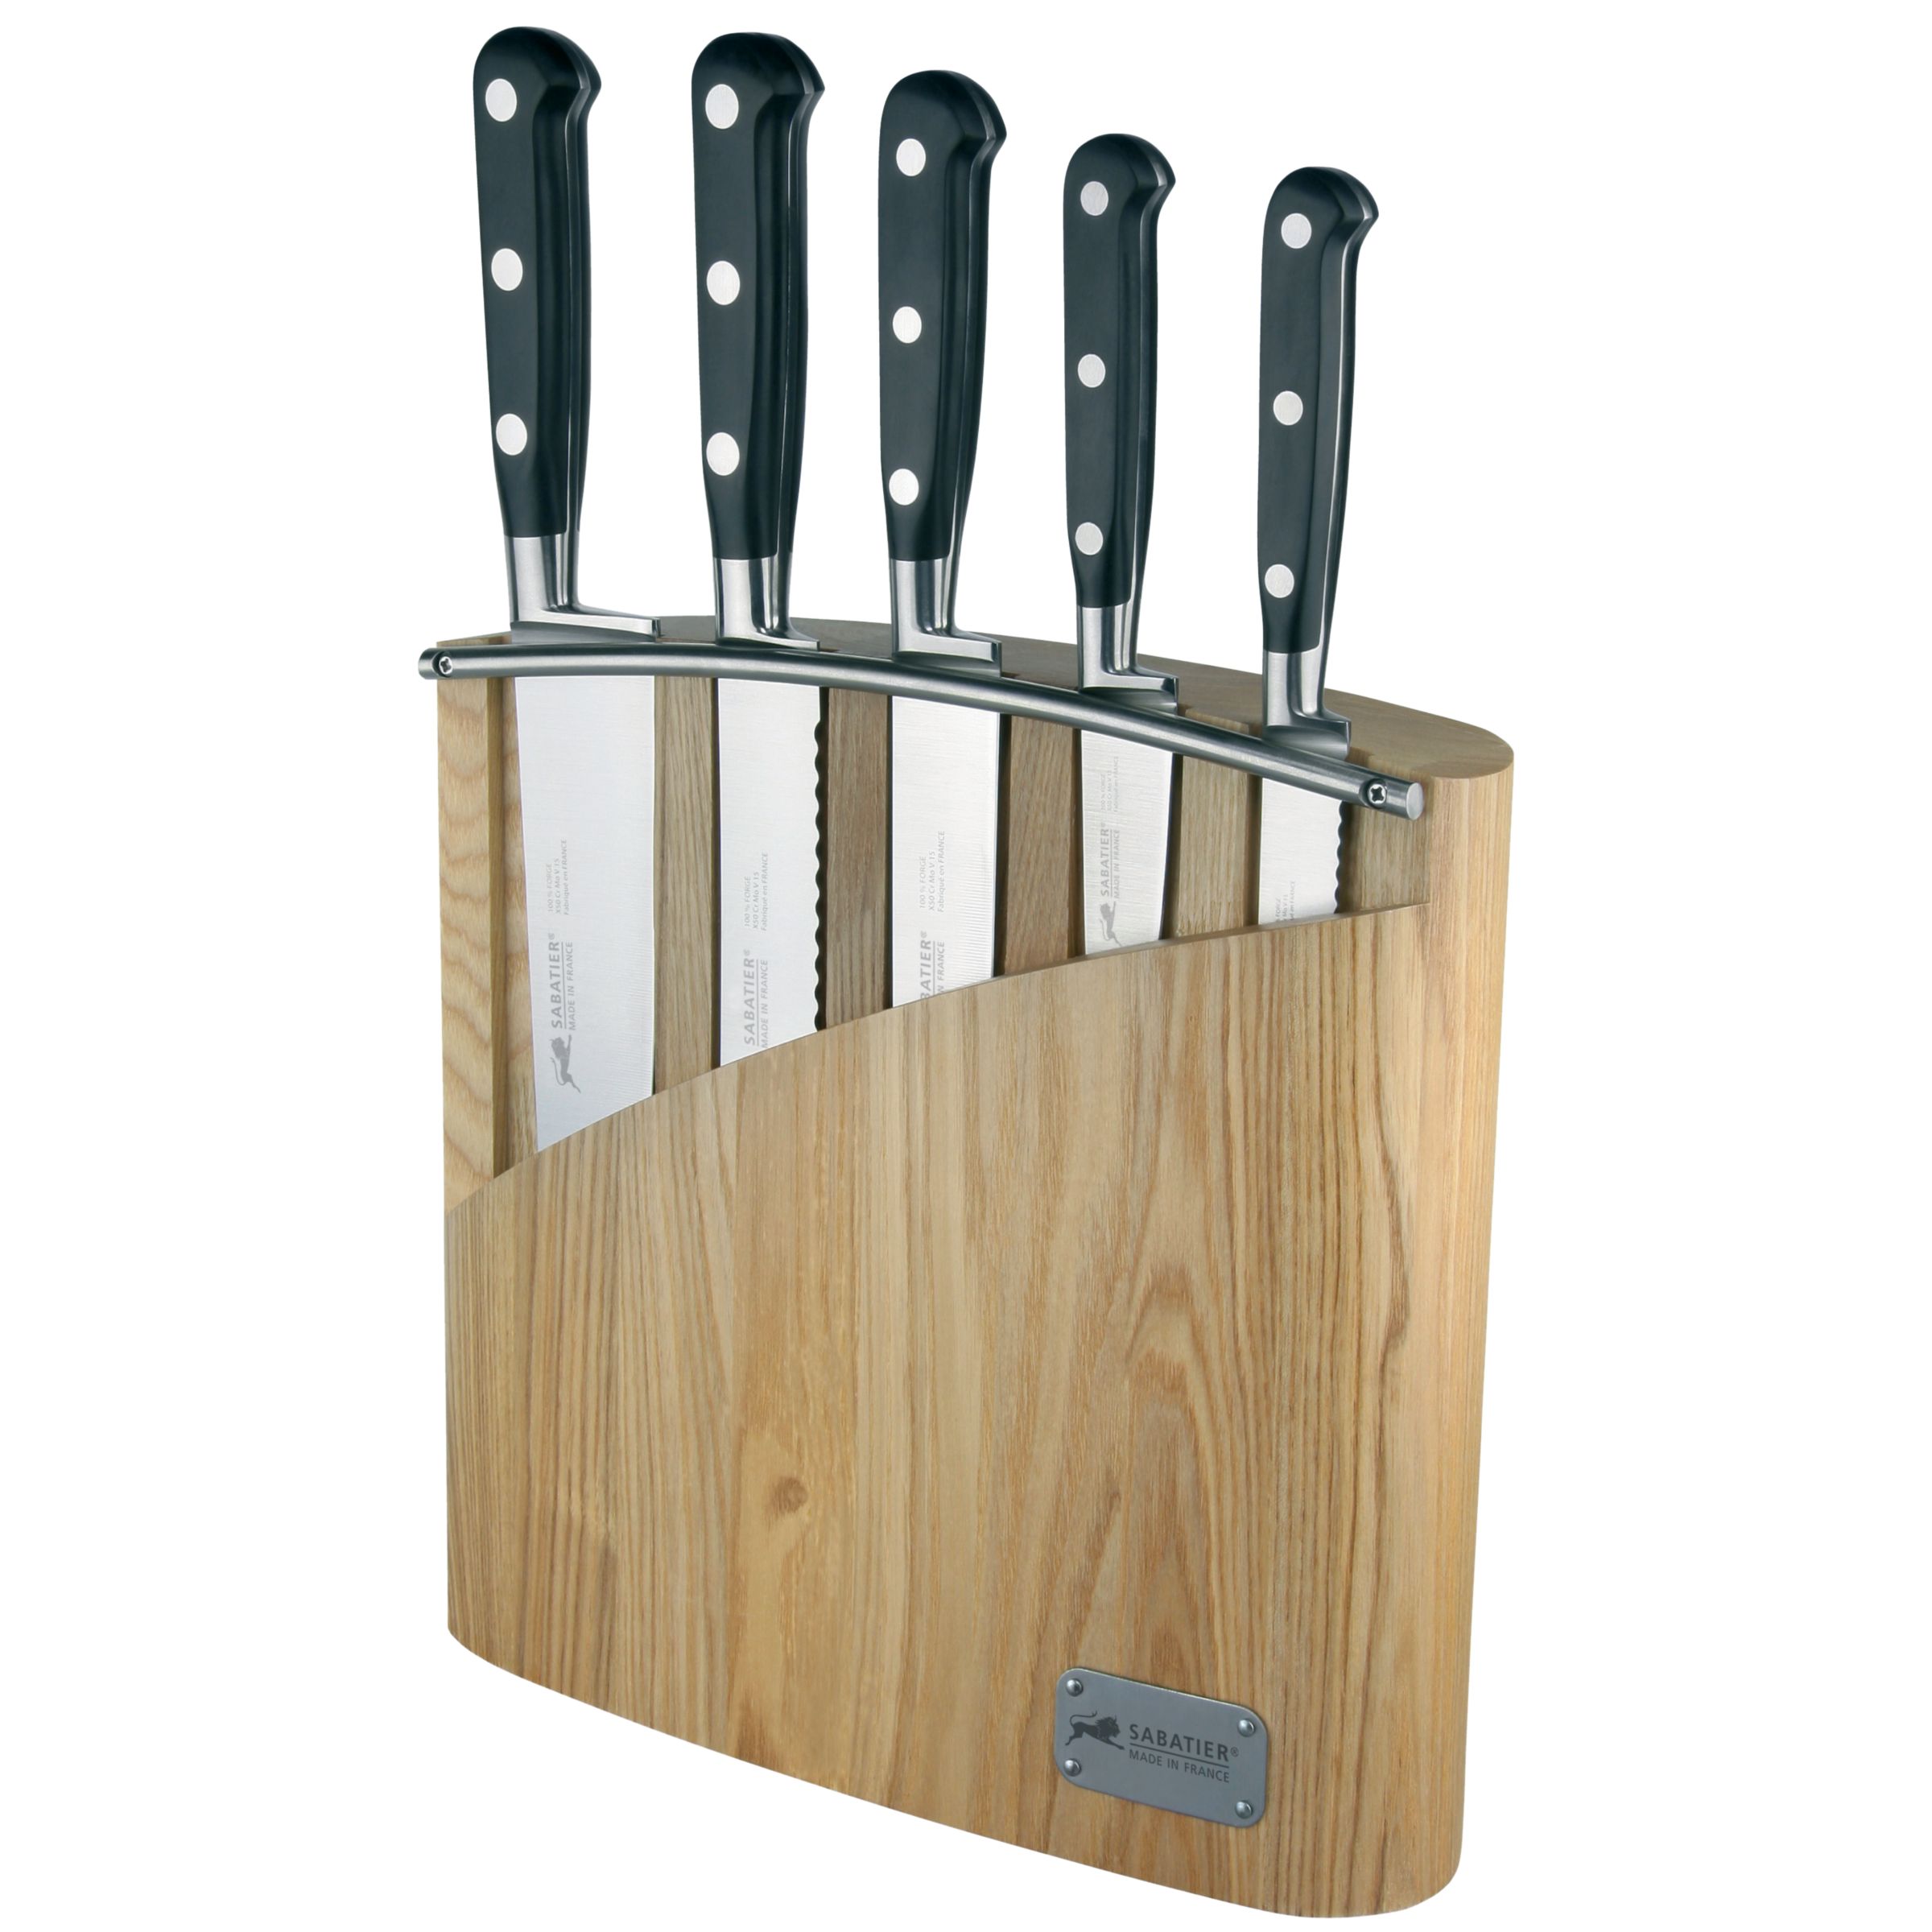 Lion Sabatier Fully-Forged 5 Piece Knife Set With Block at John Lewis